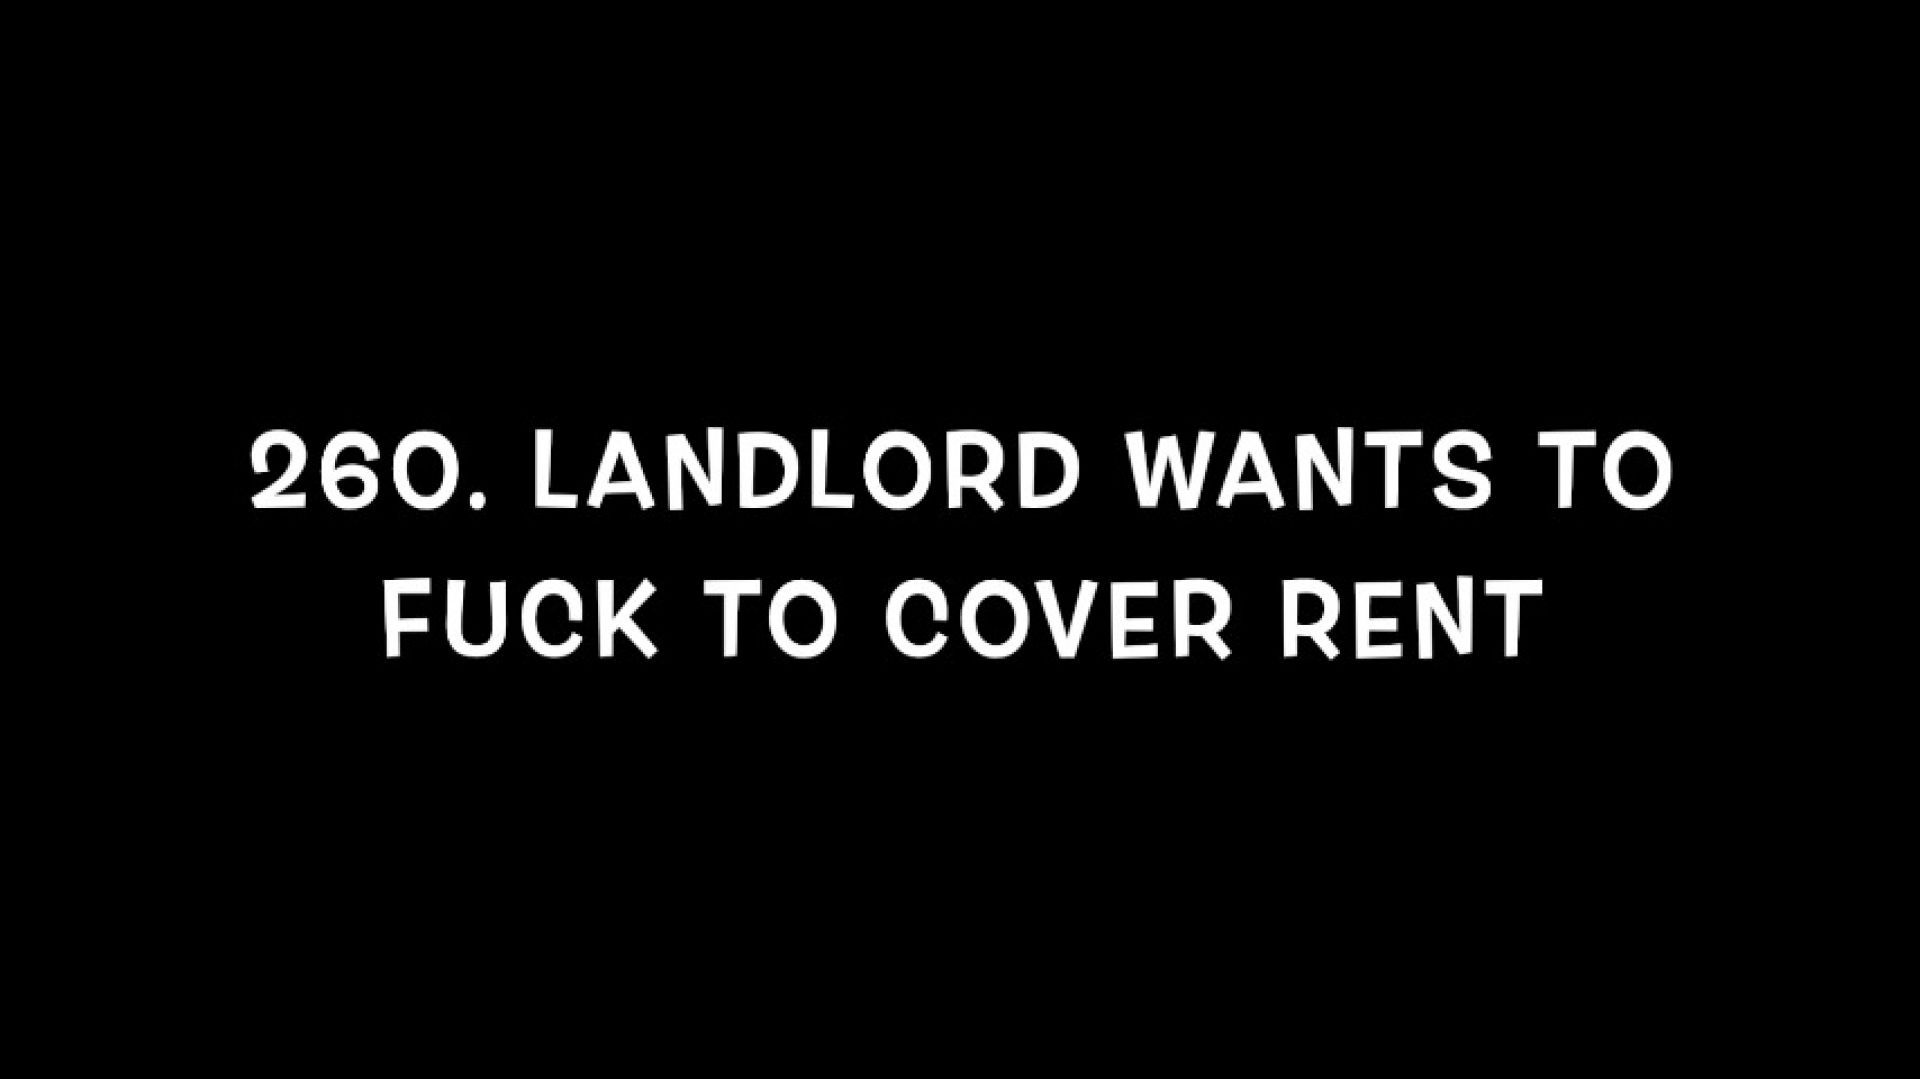 260. Landlord wants to fuck to cover rent